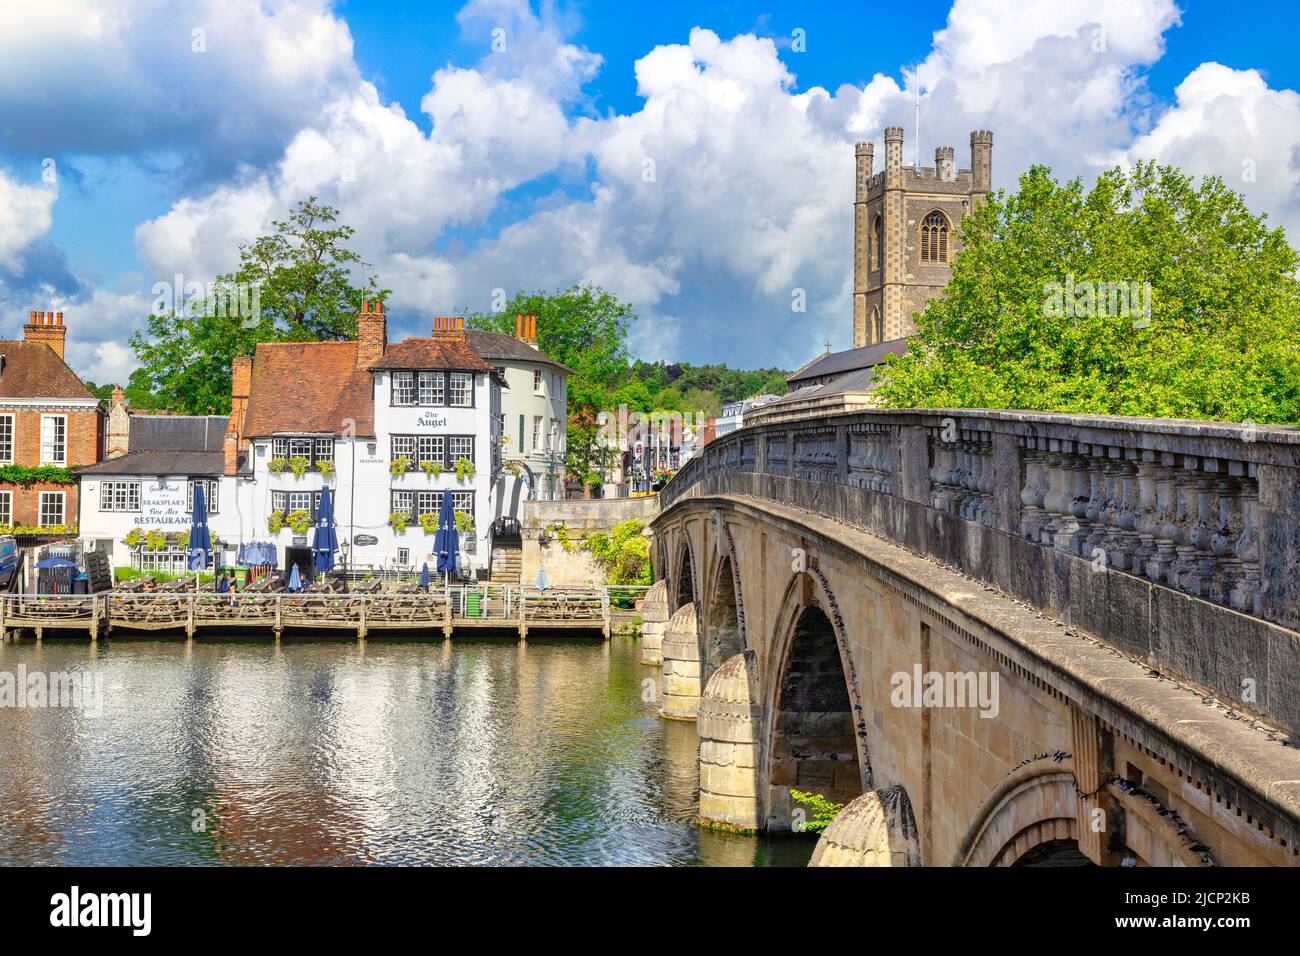 6 June 2019: Henley on Thames, UK - Henley Bridge and the River Thames, with The Angel riverside pub and restaurant. Stock Photo